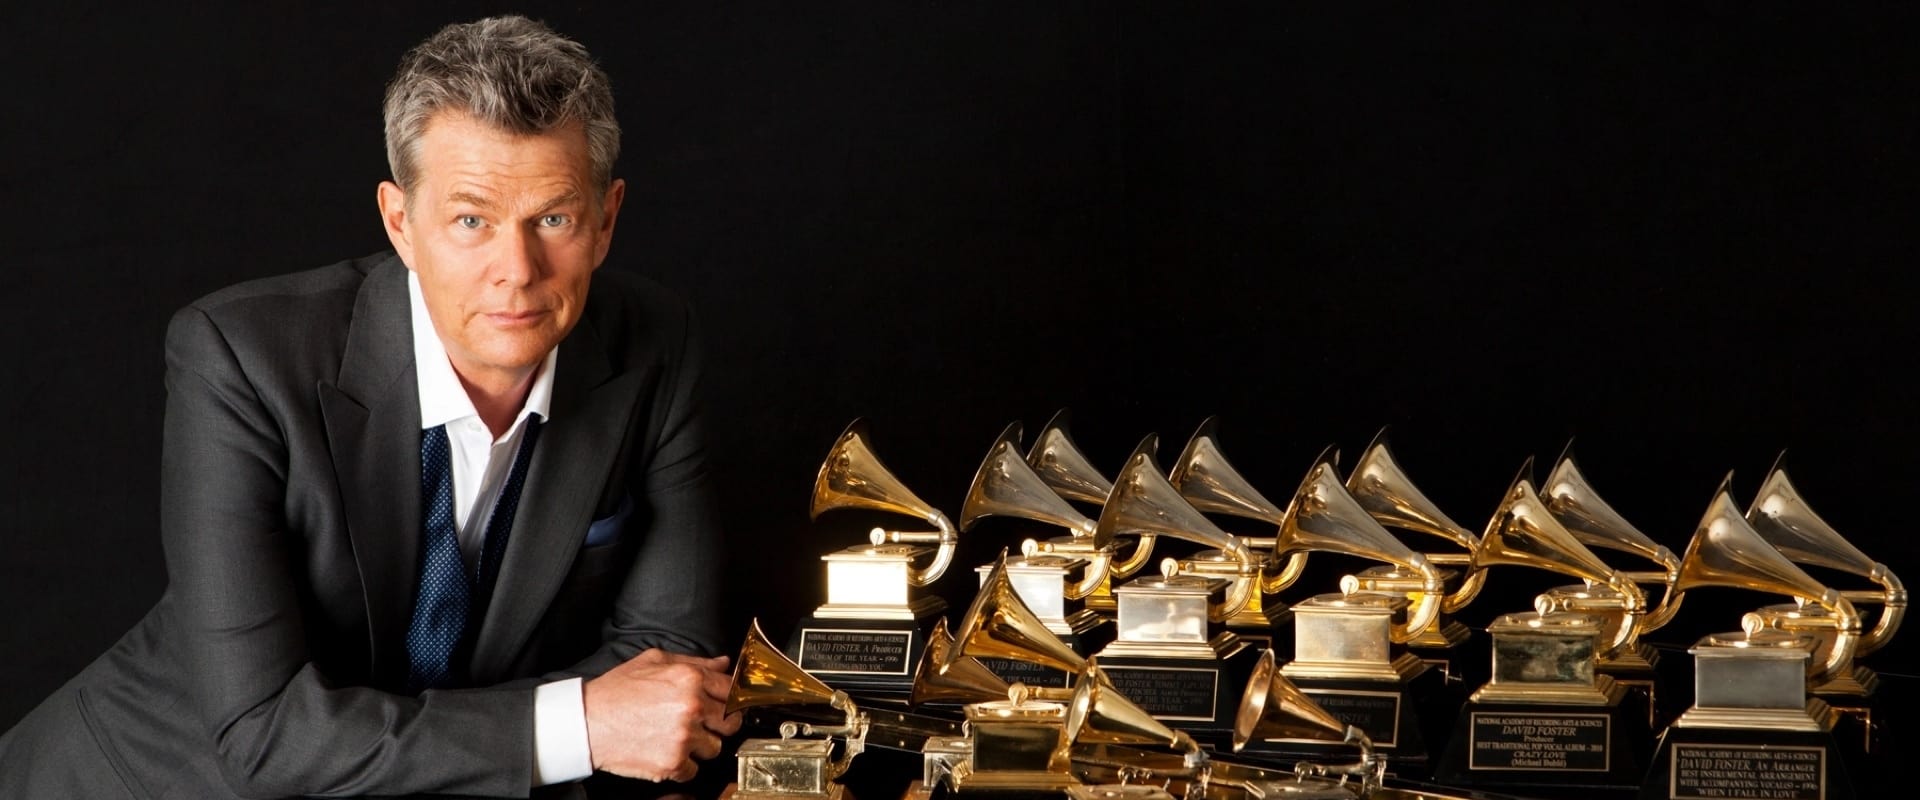 David Foster: Off the Record